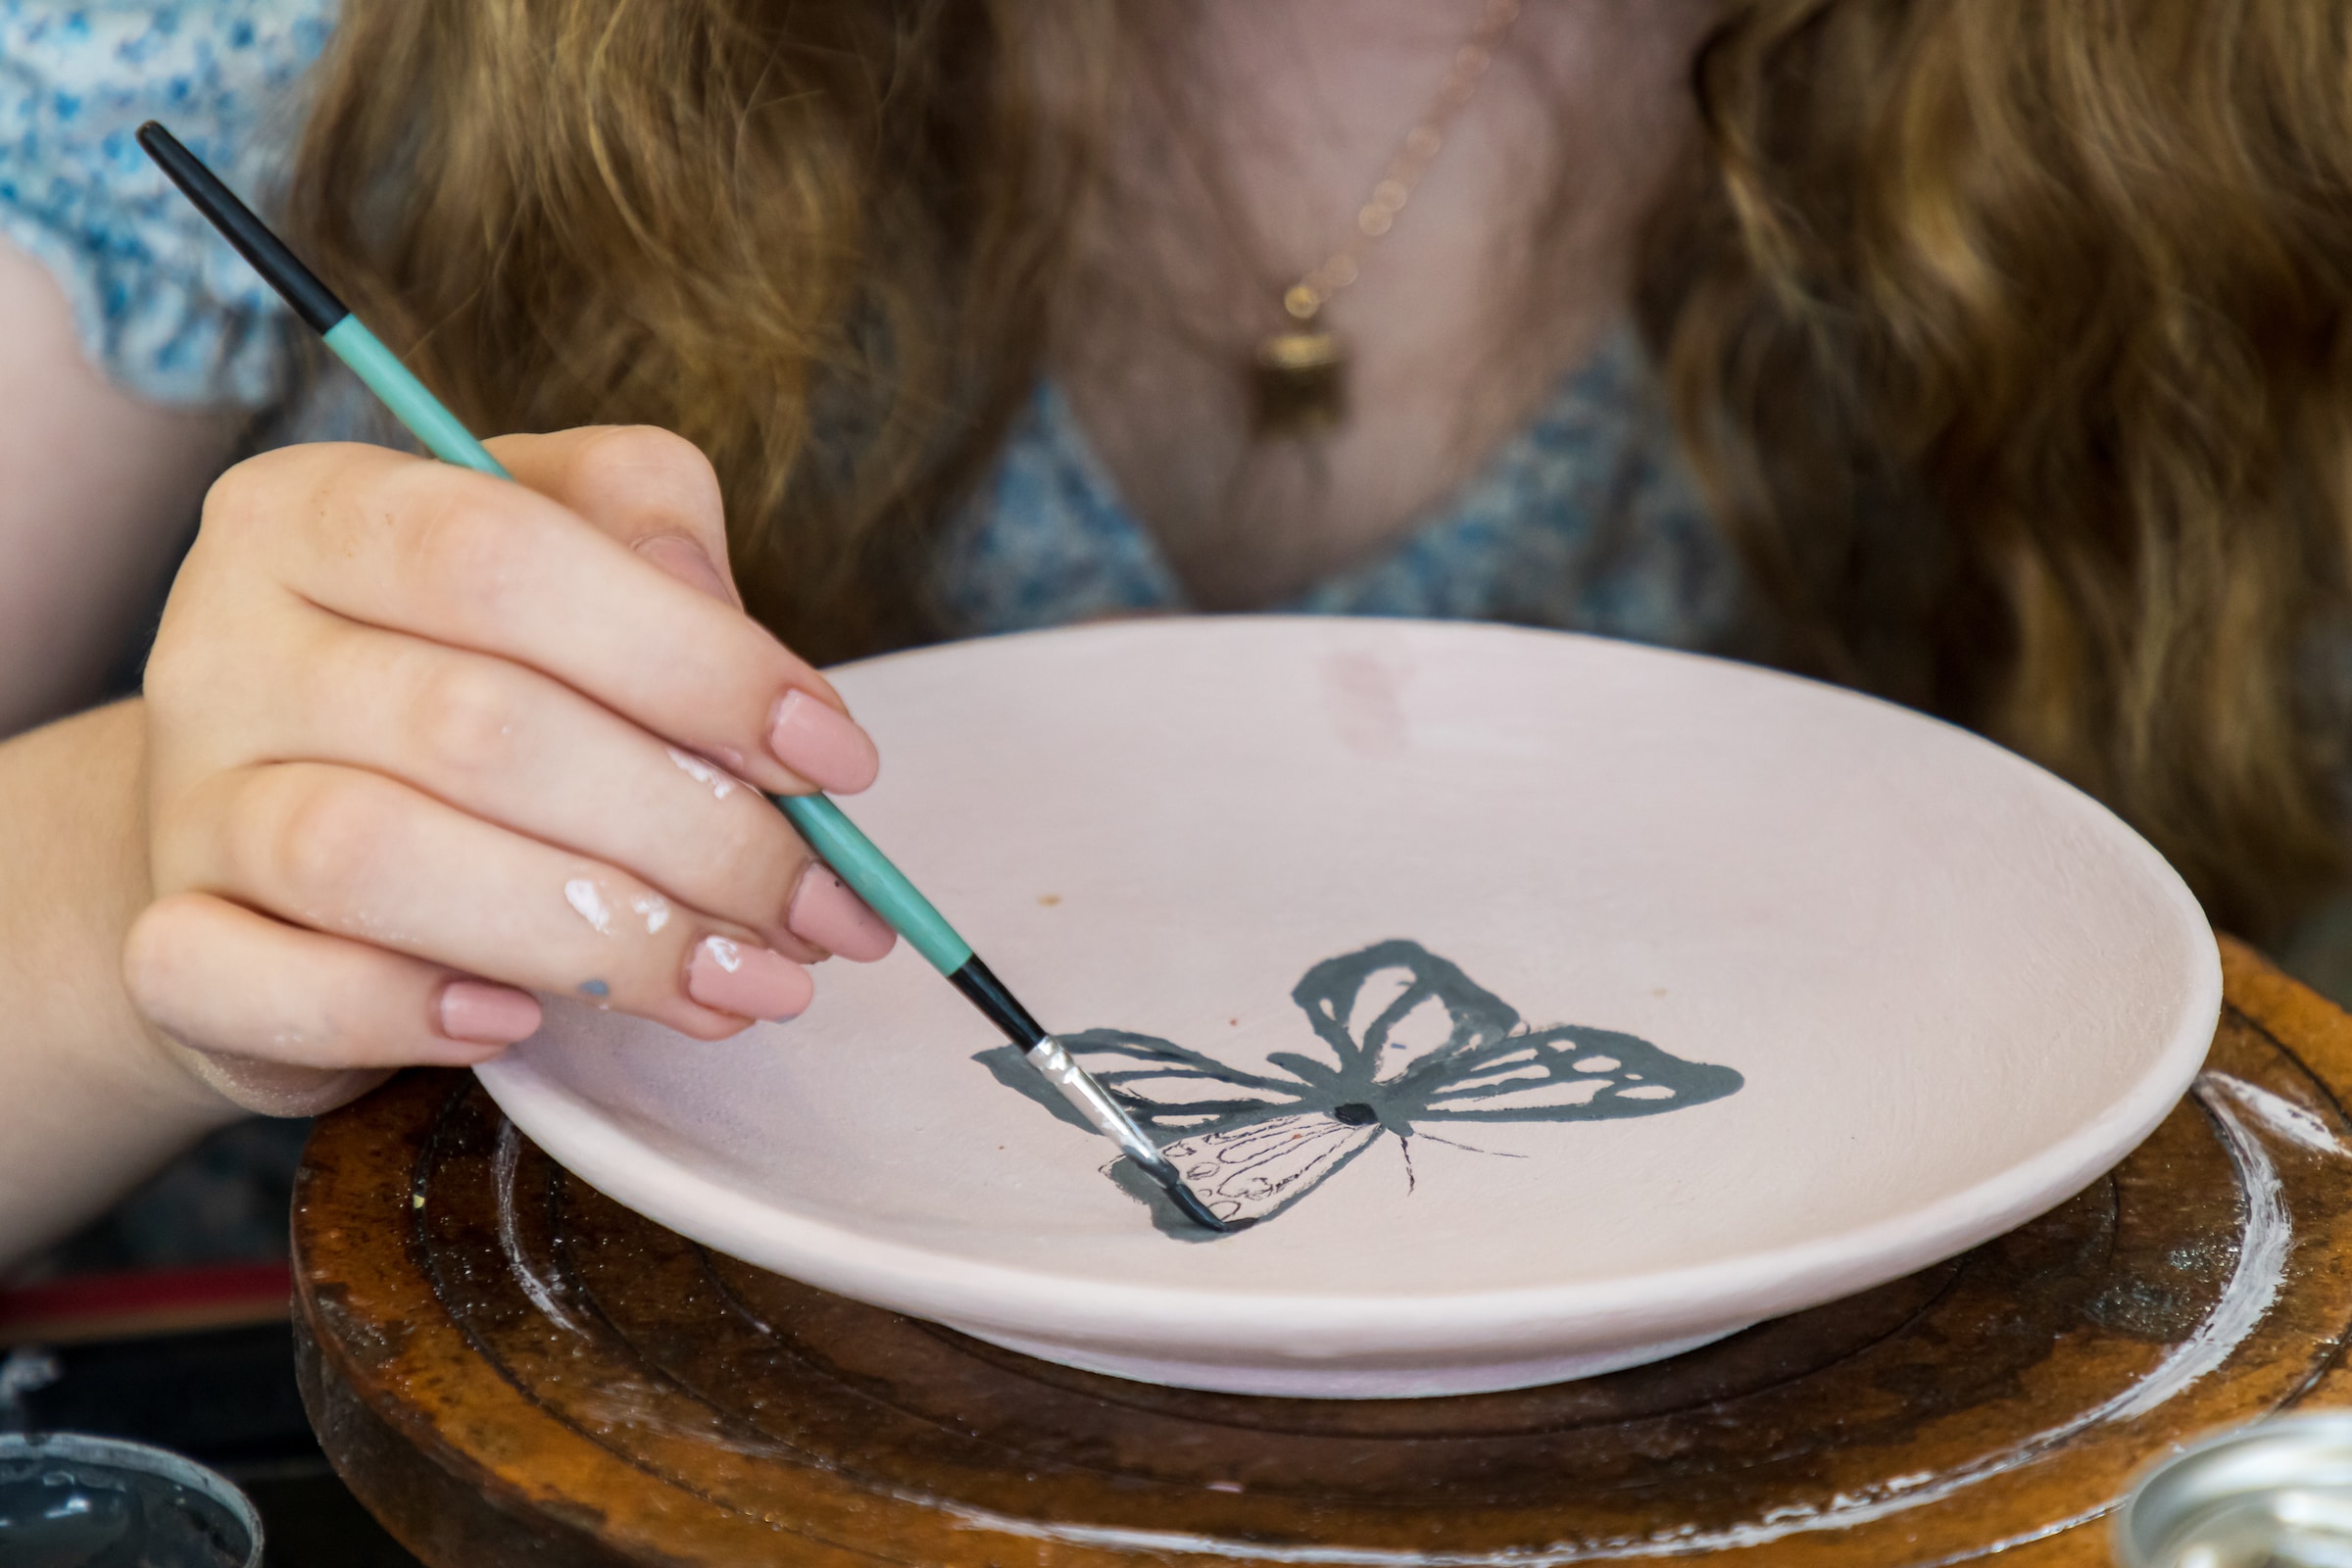 A person painting on a pottery plate | Source: Unsplash